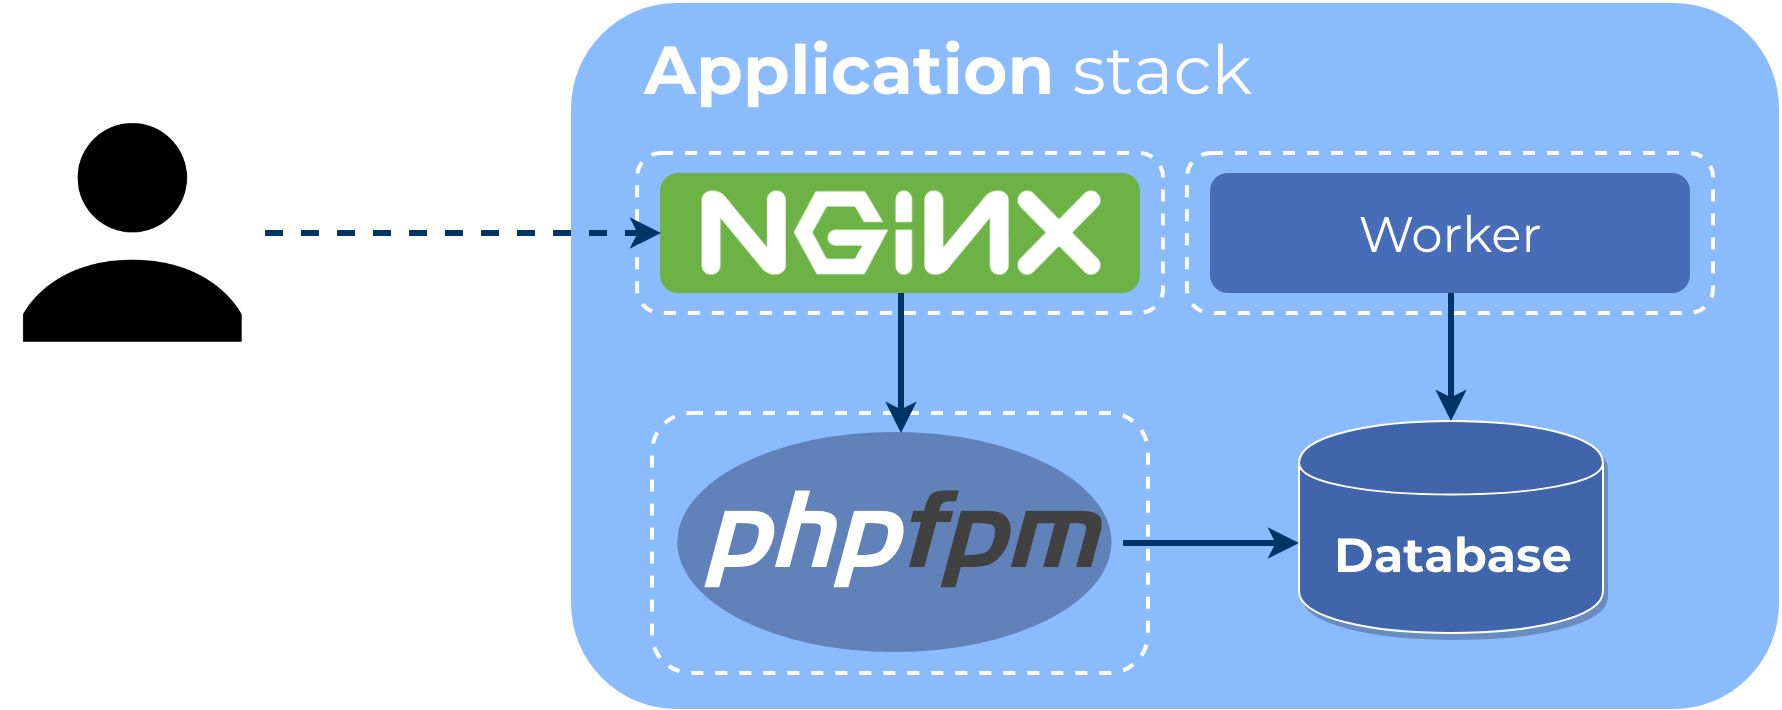 Containerized application stack